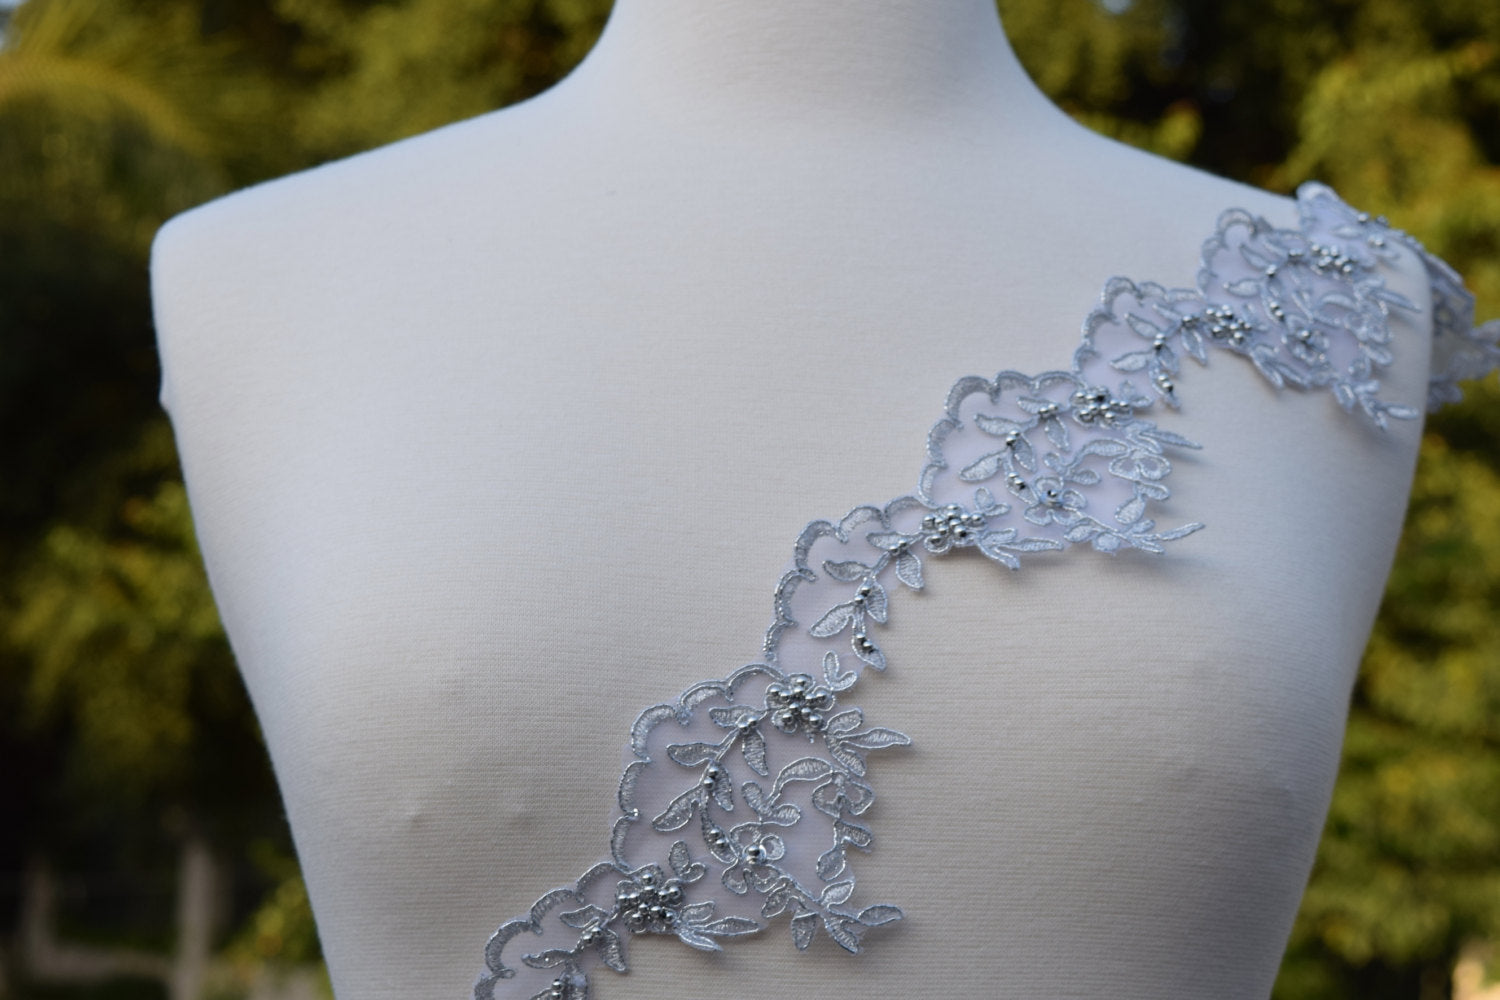 Shimmery Silver Polyester Lace Trim with Silver Balls as Beading